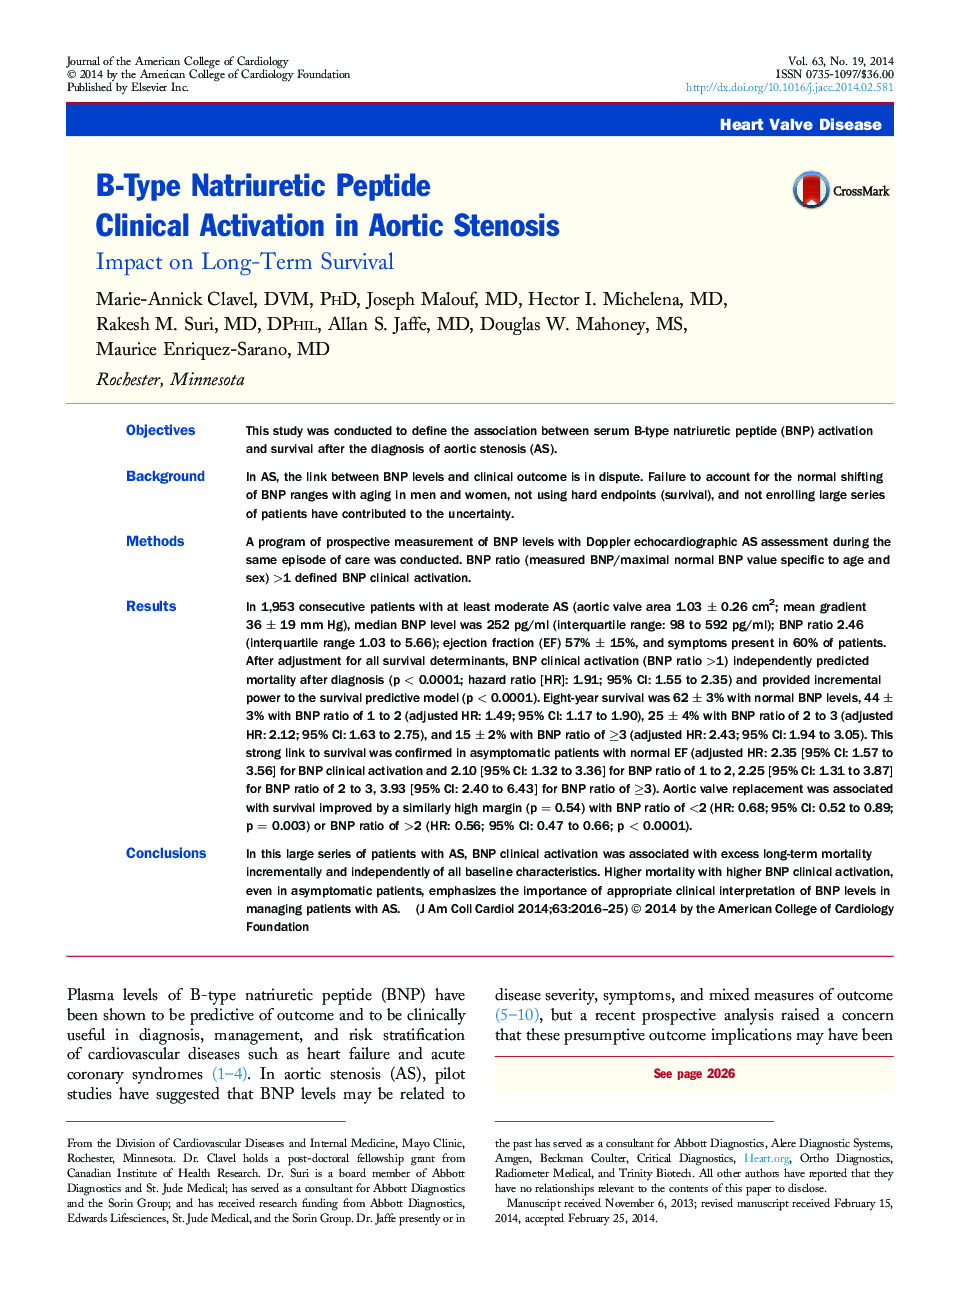 B-Type Natriuretic Peptide Clinical Activation in Aortic Stenosis : Impact on Long-Term Survival